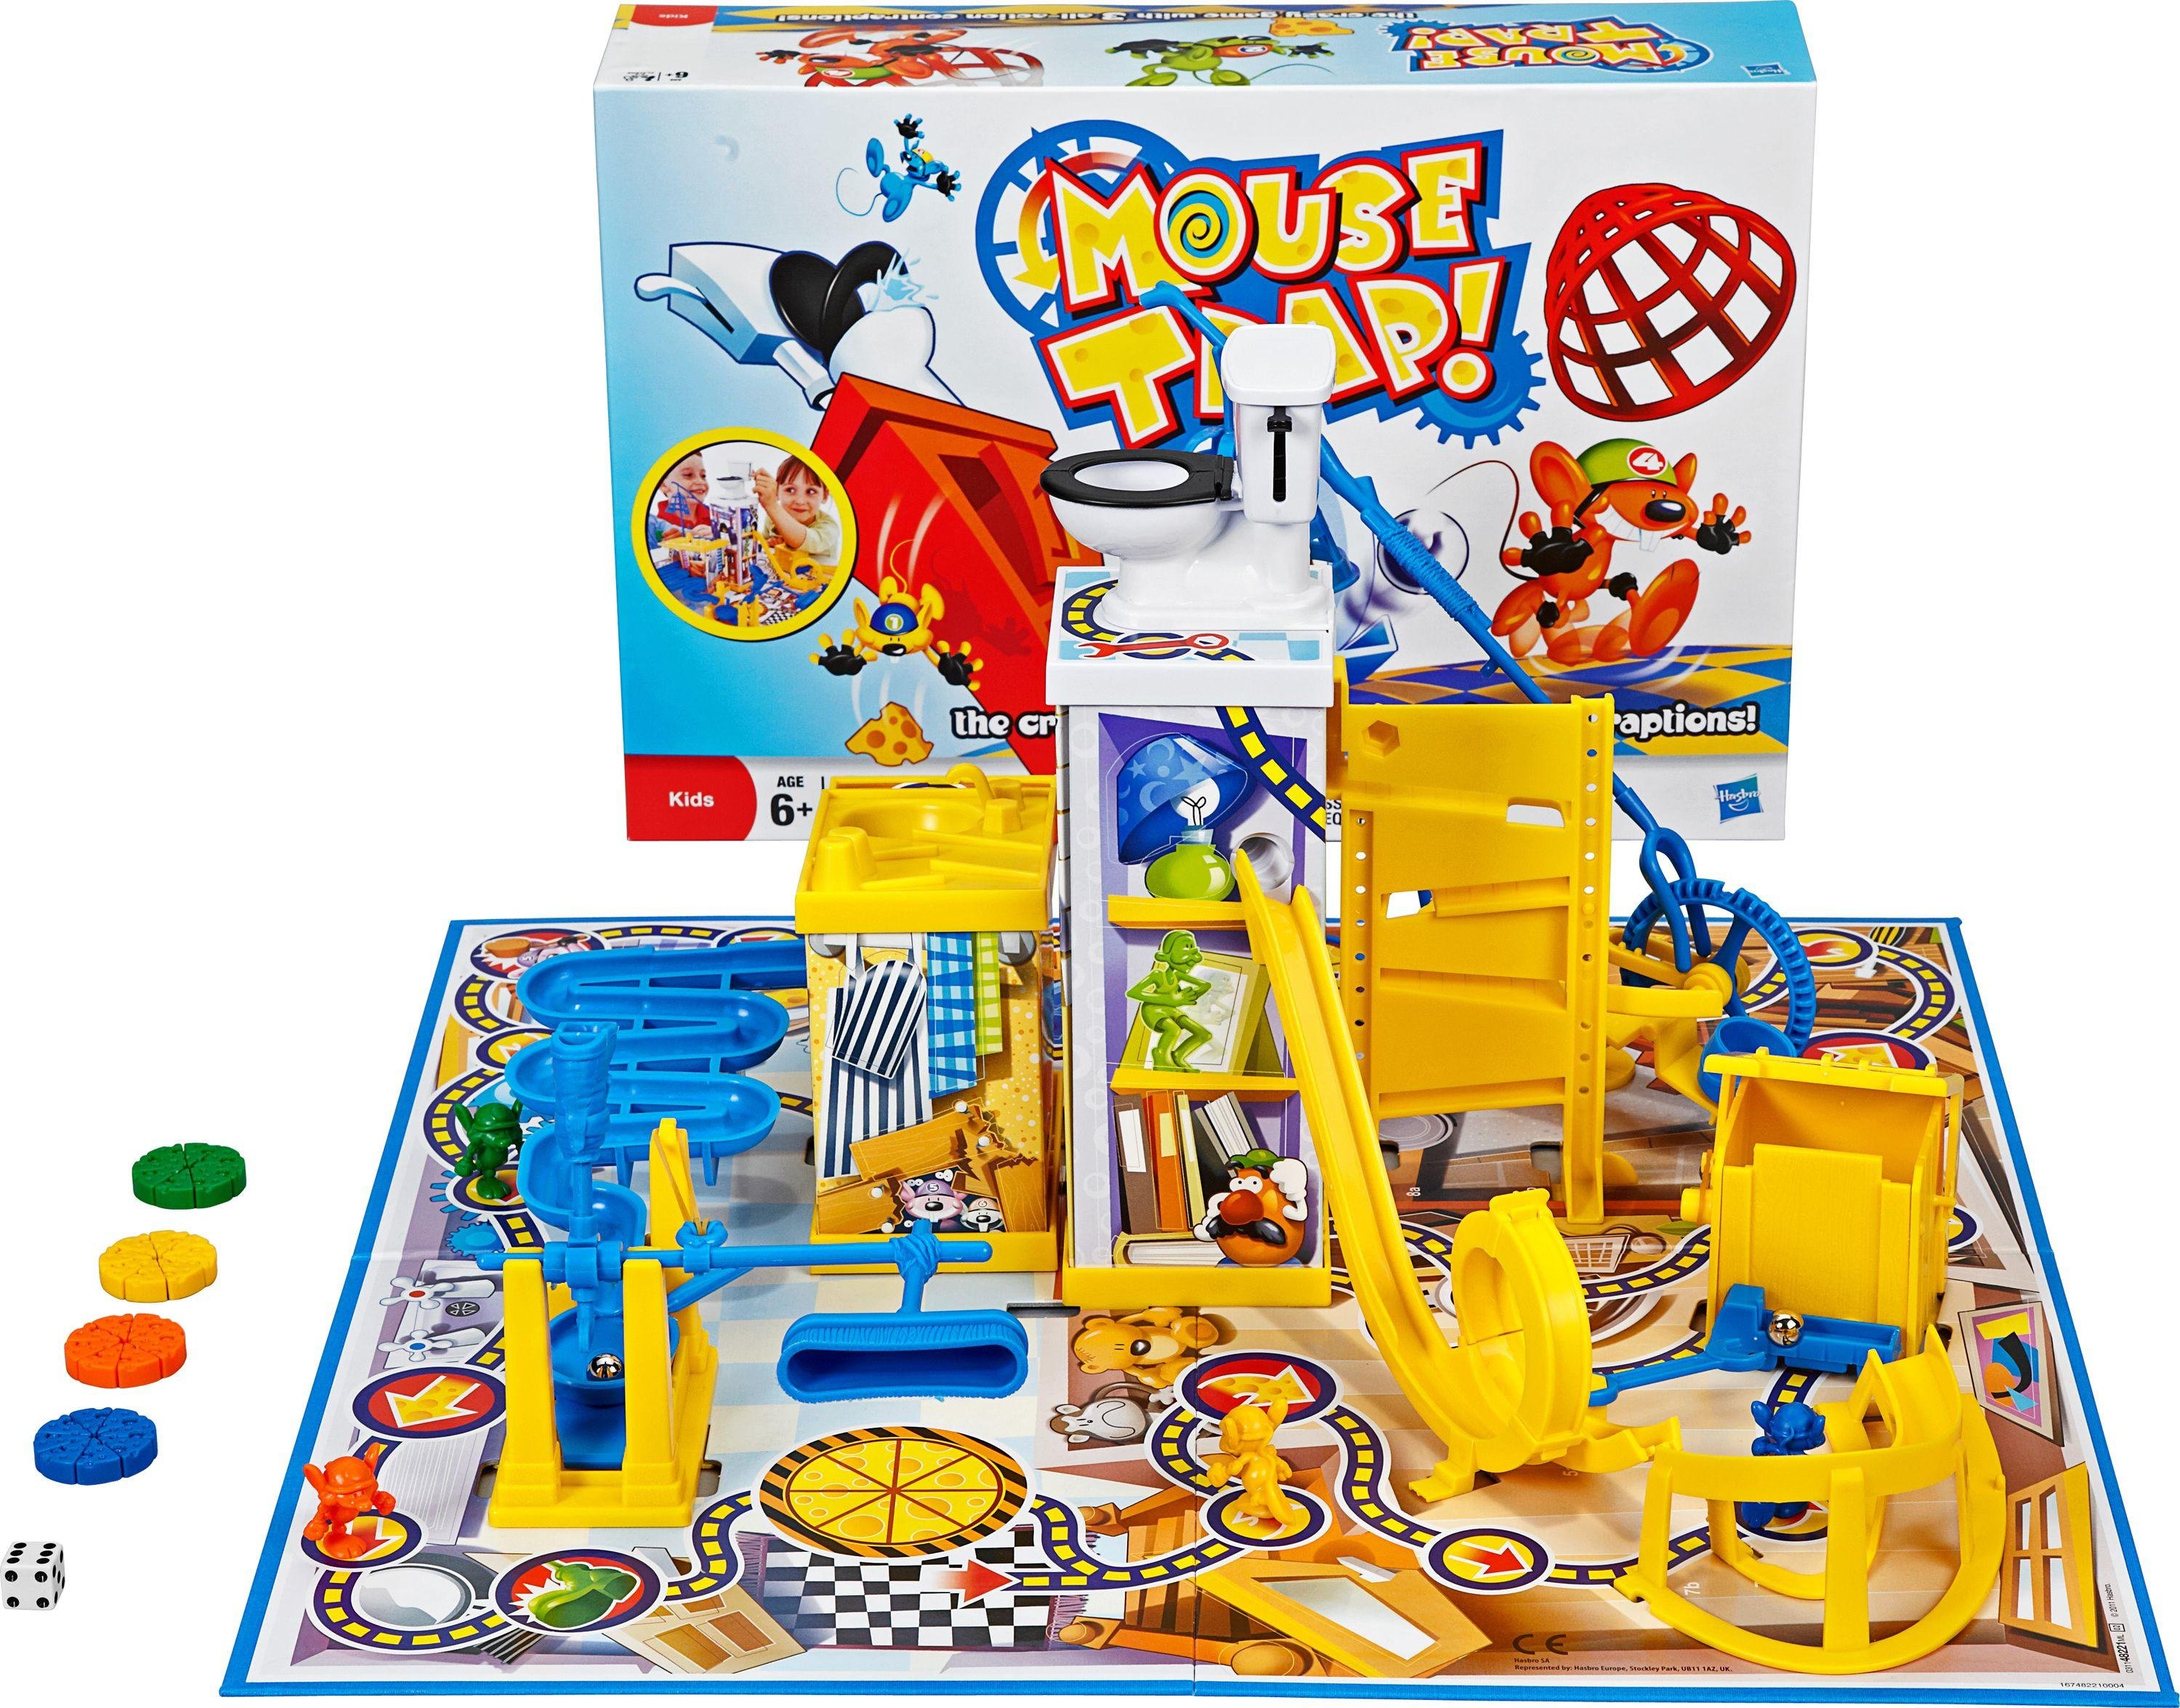 mouse trap game old version